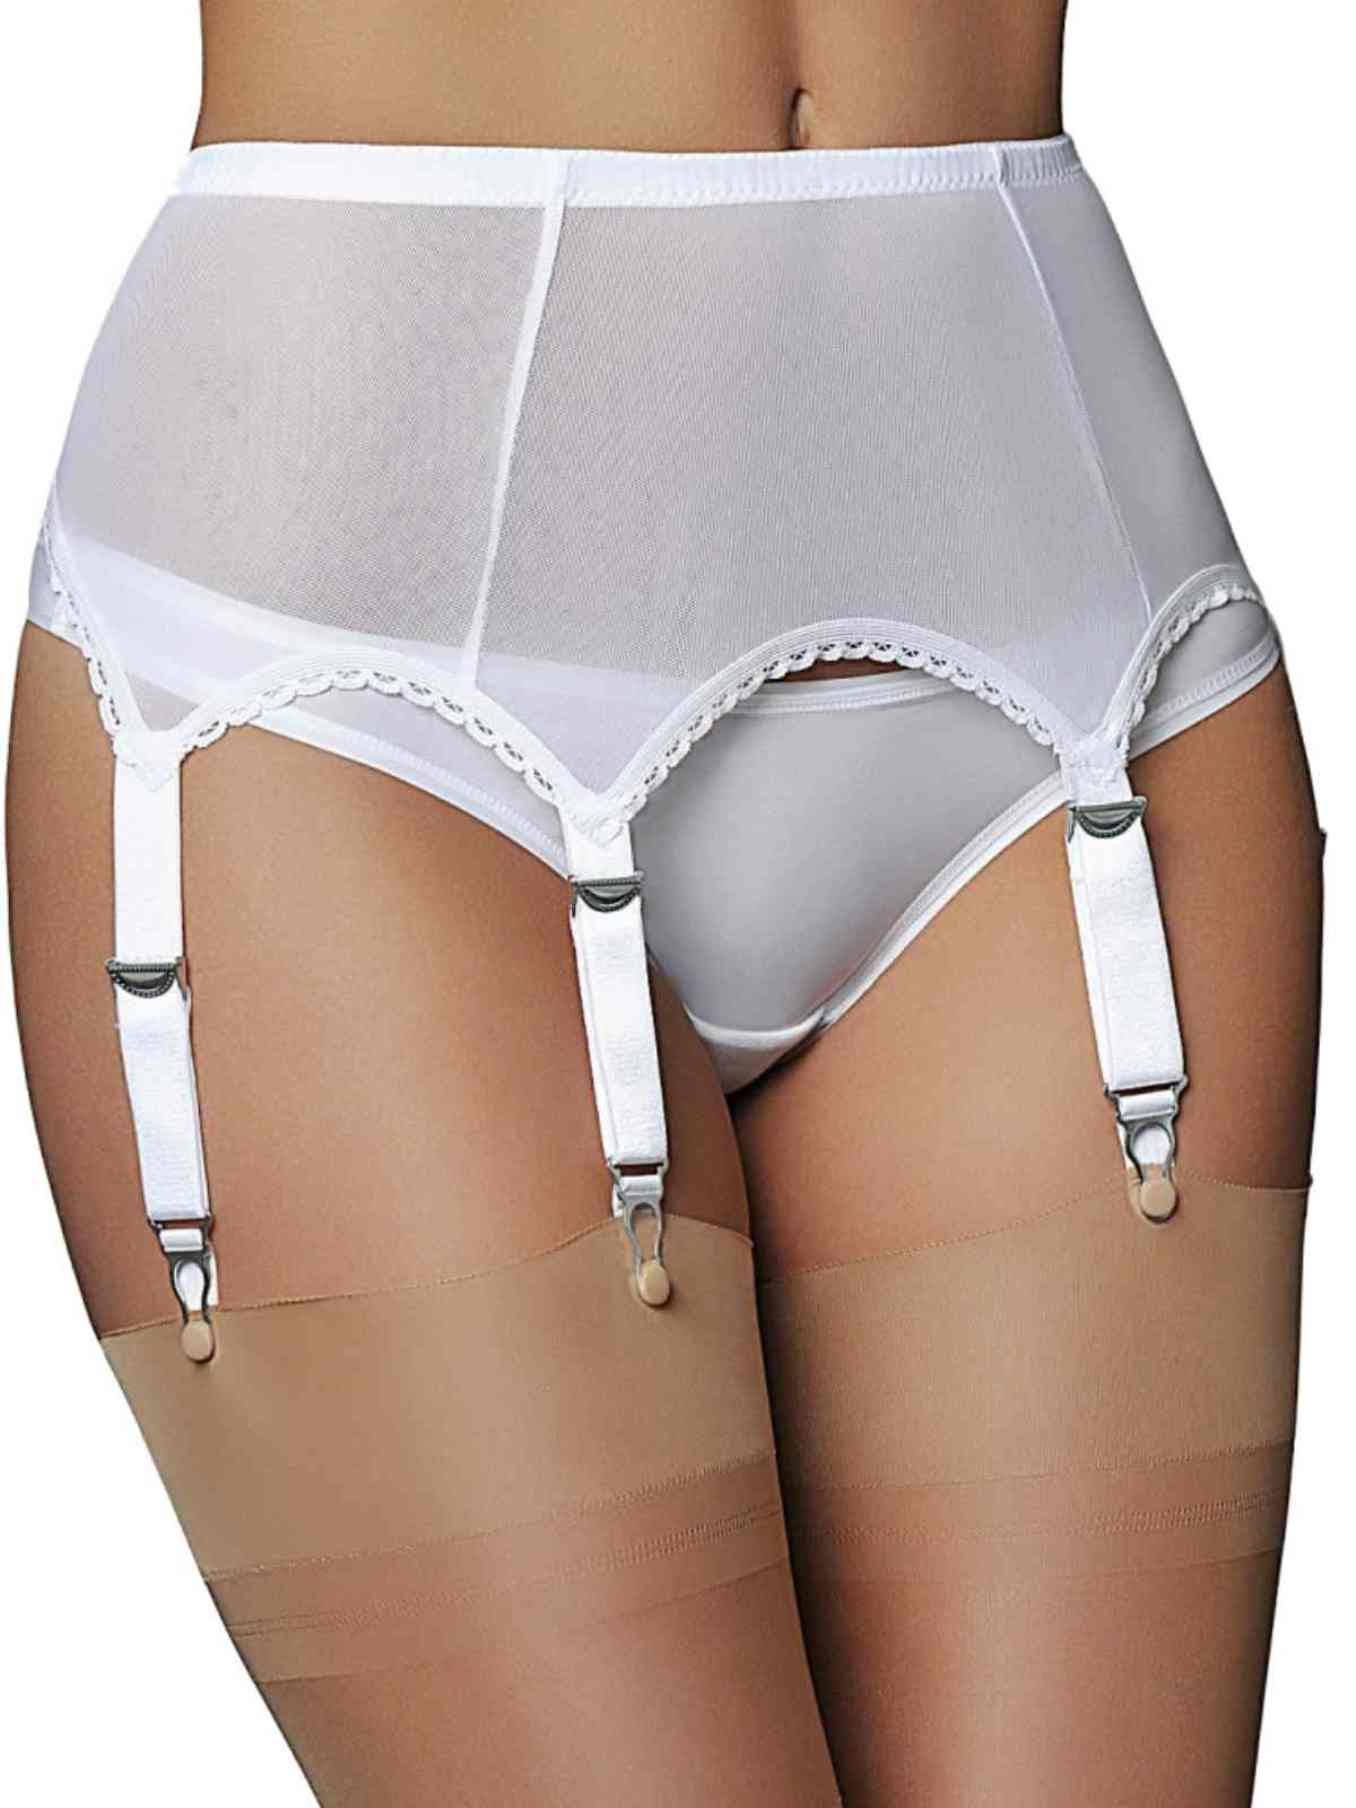 Premier Lingerie 6 Strap 'crotchless' Shapewear Girdle With Garters for  Stockings Plcg6 -  New Zealand